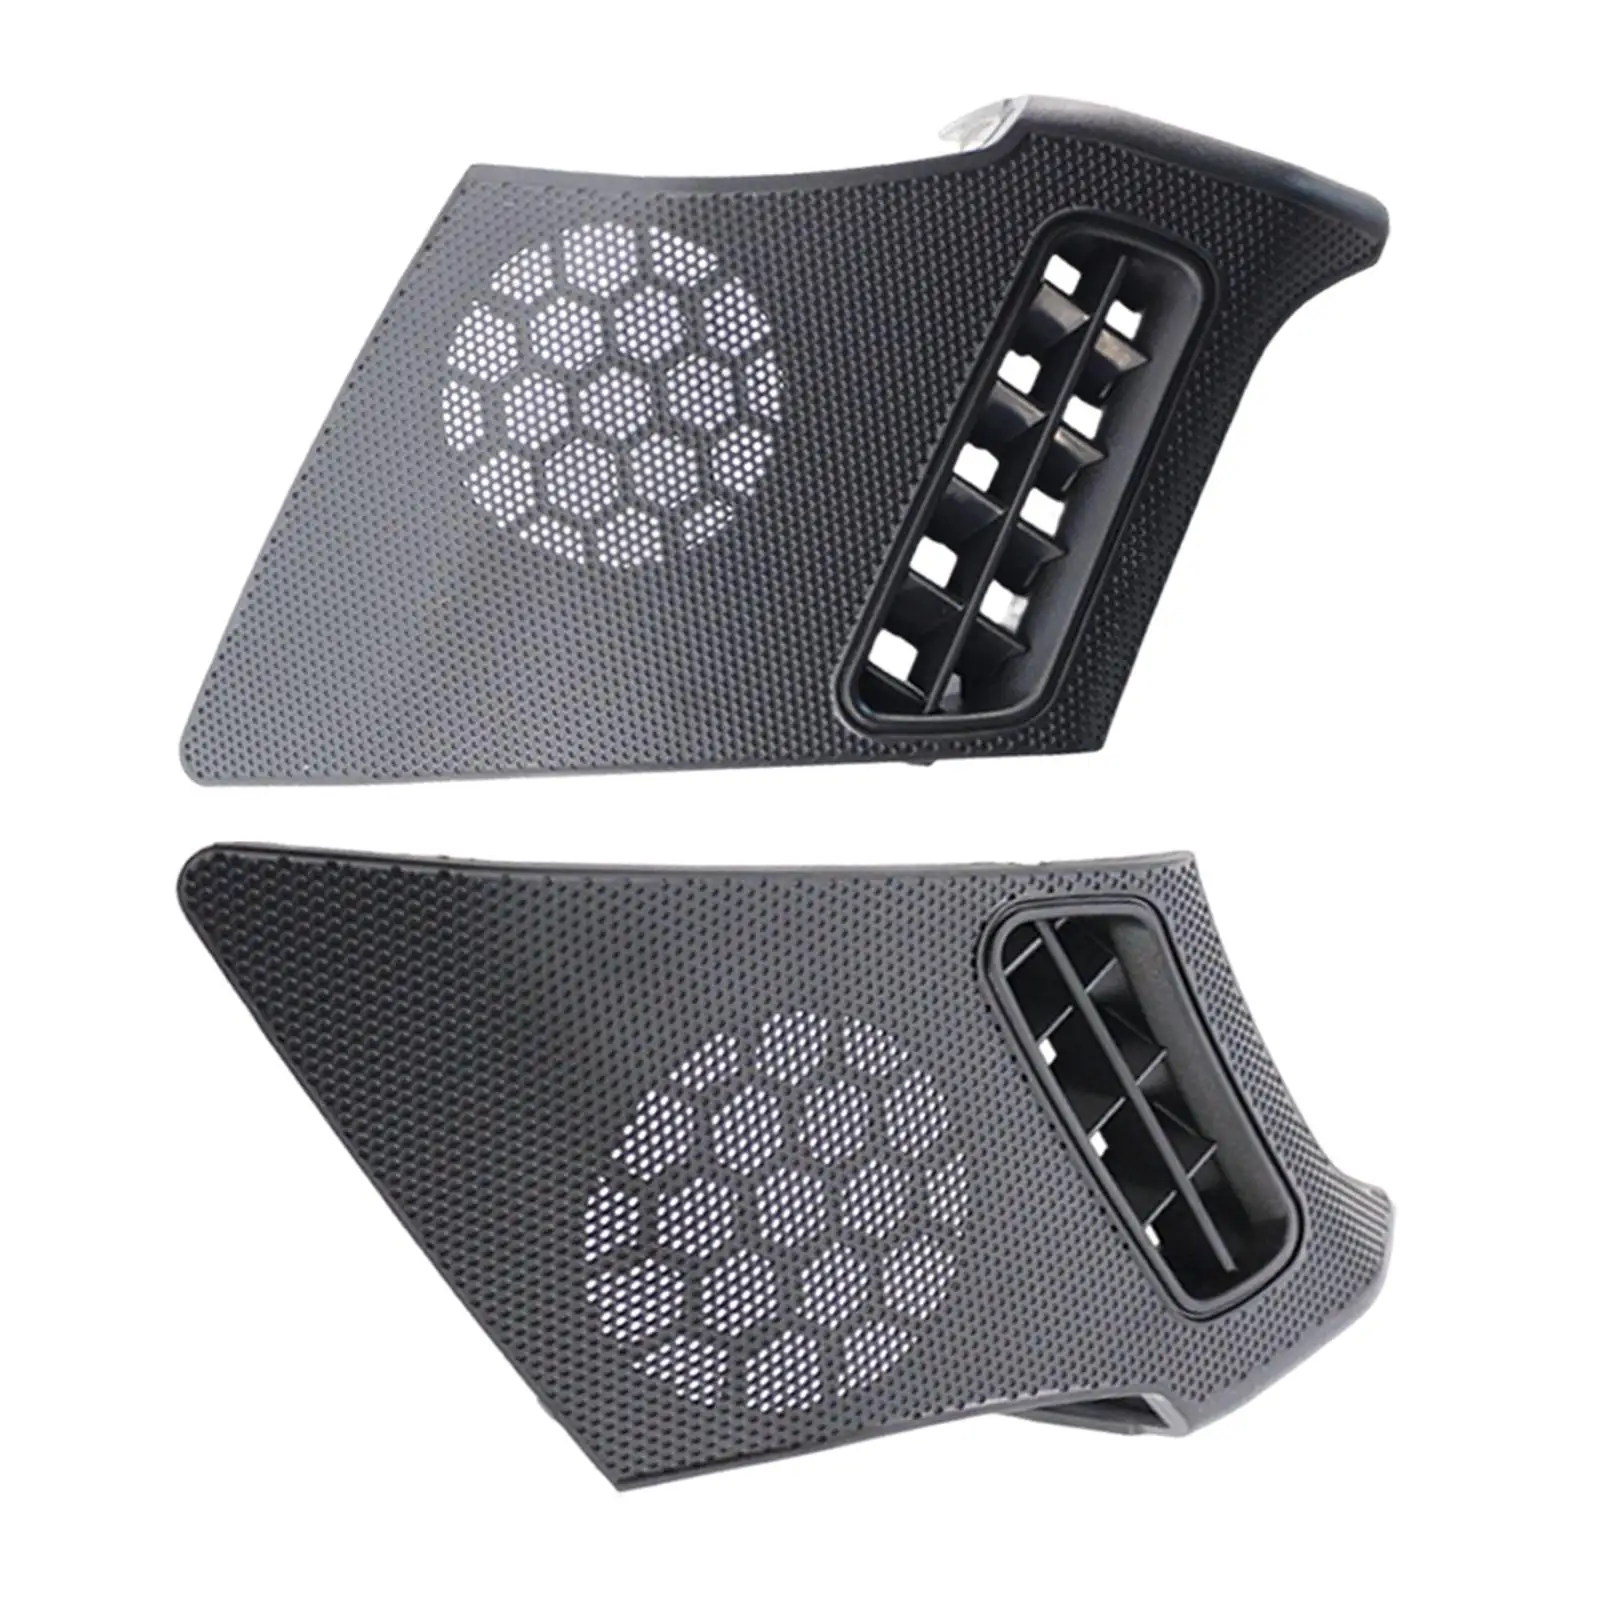  Board Air Vent Speaker Grill Covers Decorative Protective Durable